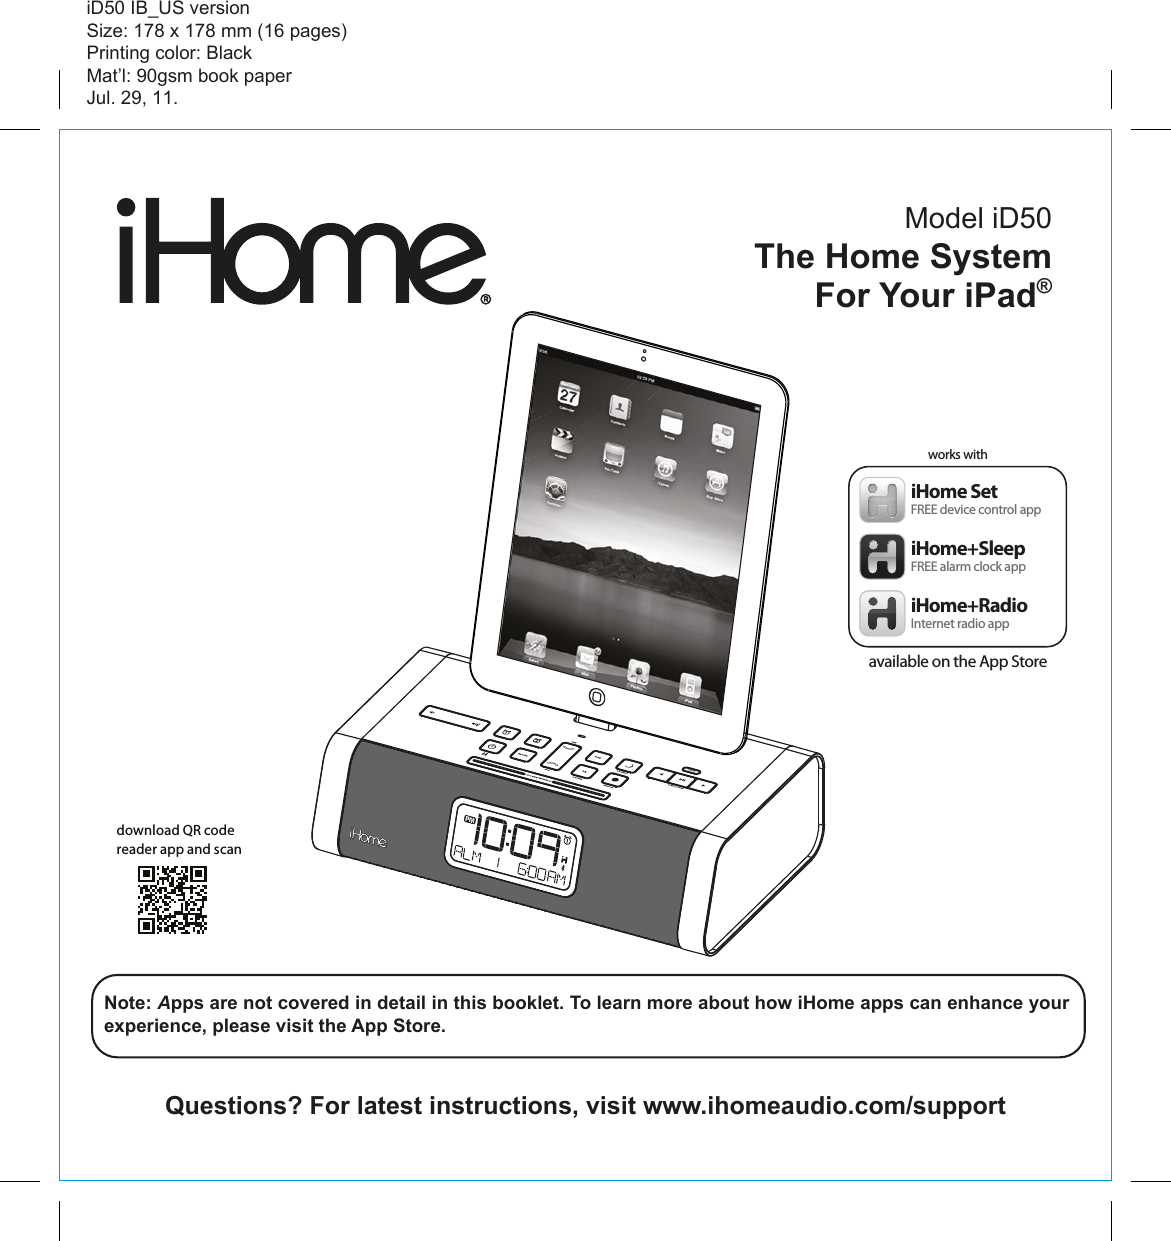 Model iD50The Home System For Your iPad® Questions? For latest instructions, visit www.ihomeaudio.com/supportiD50 IB_US versionSize: 178 x 178 mm (16 pages)Printing color: BlackMat’l: 90gsm book paperJul. 29, 11.Note: Apps are not covered in detail in this booklet. To learn more about how iHome apps can enhance your experience, please visit the App Store.download QR code reader app and scaniHome+SleepFREE alarm clock appiHome SetFREE device control appiHome+RadioInternet radio appworks withavailable on the App Store